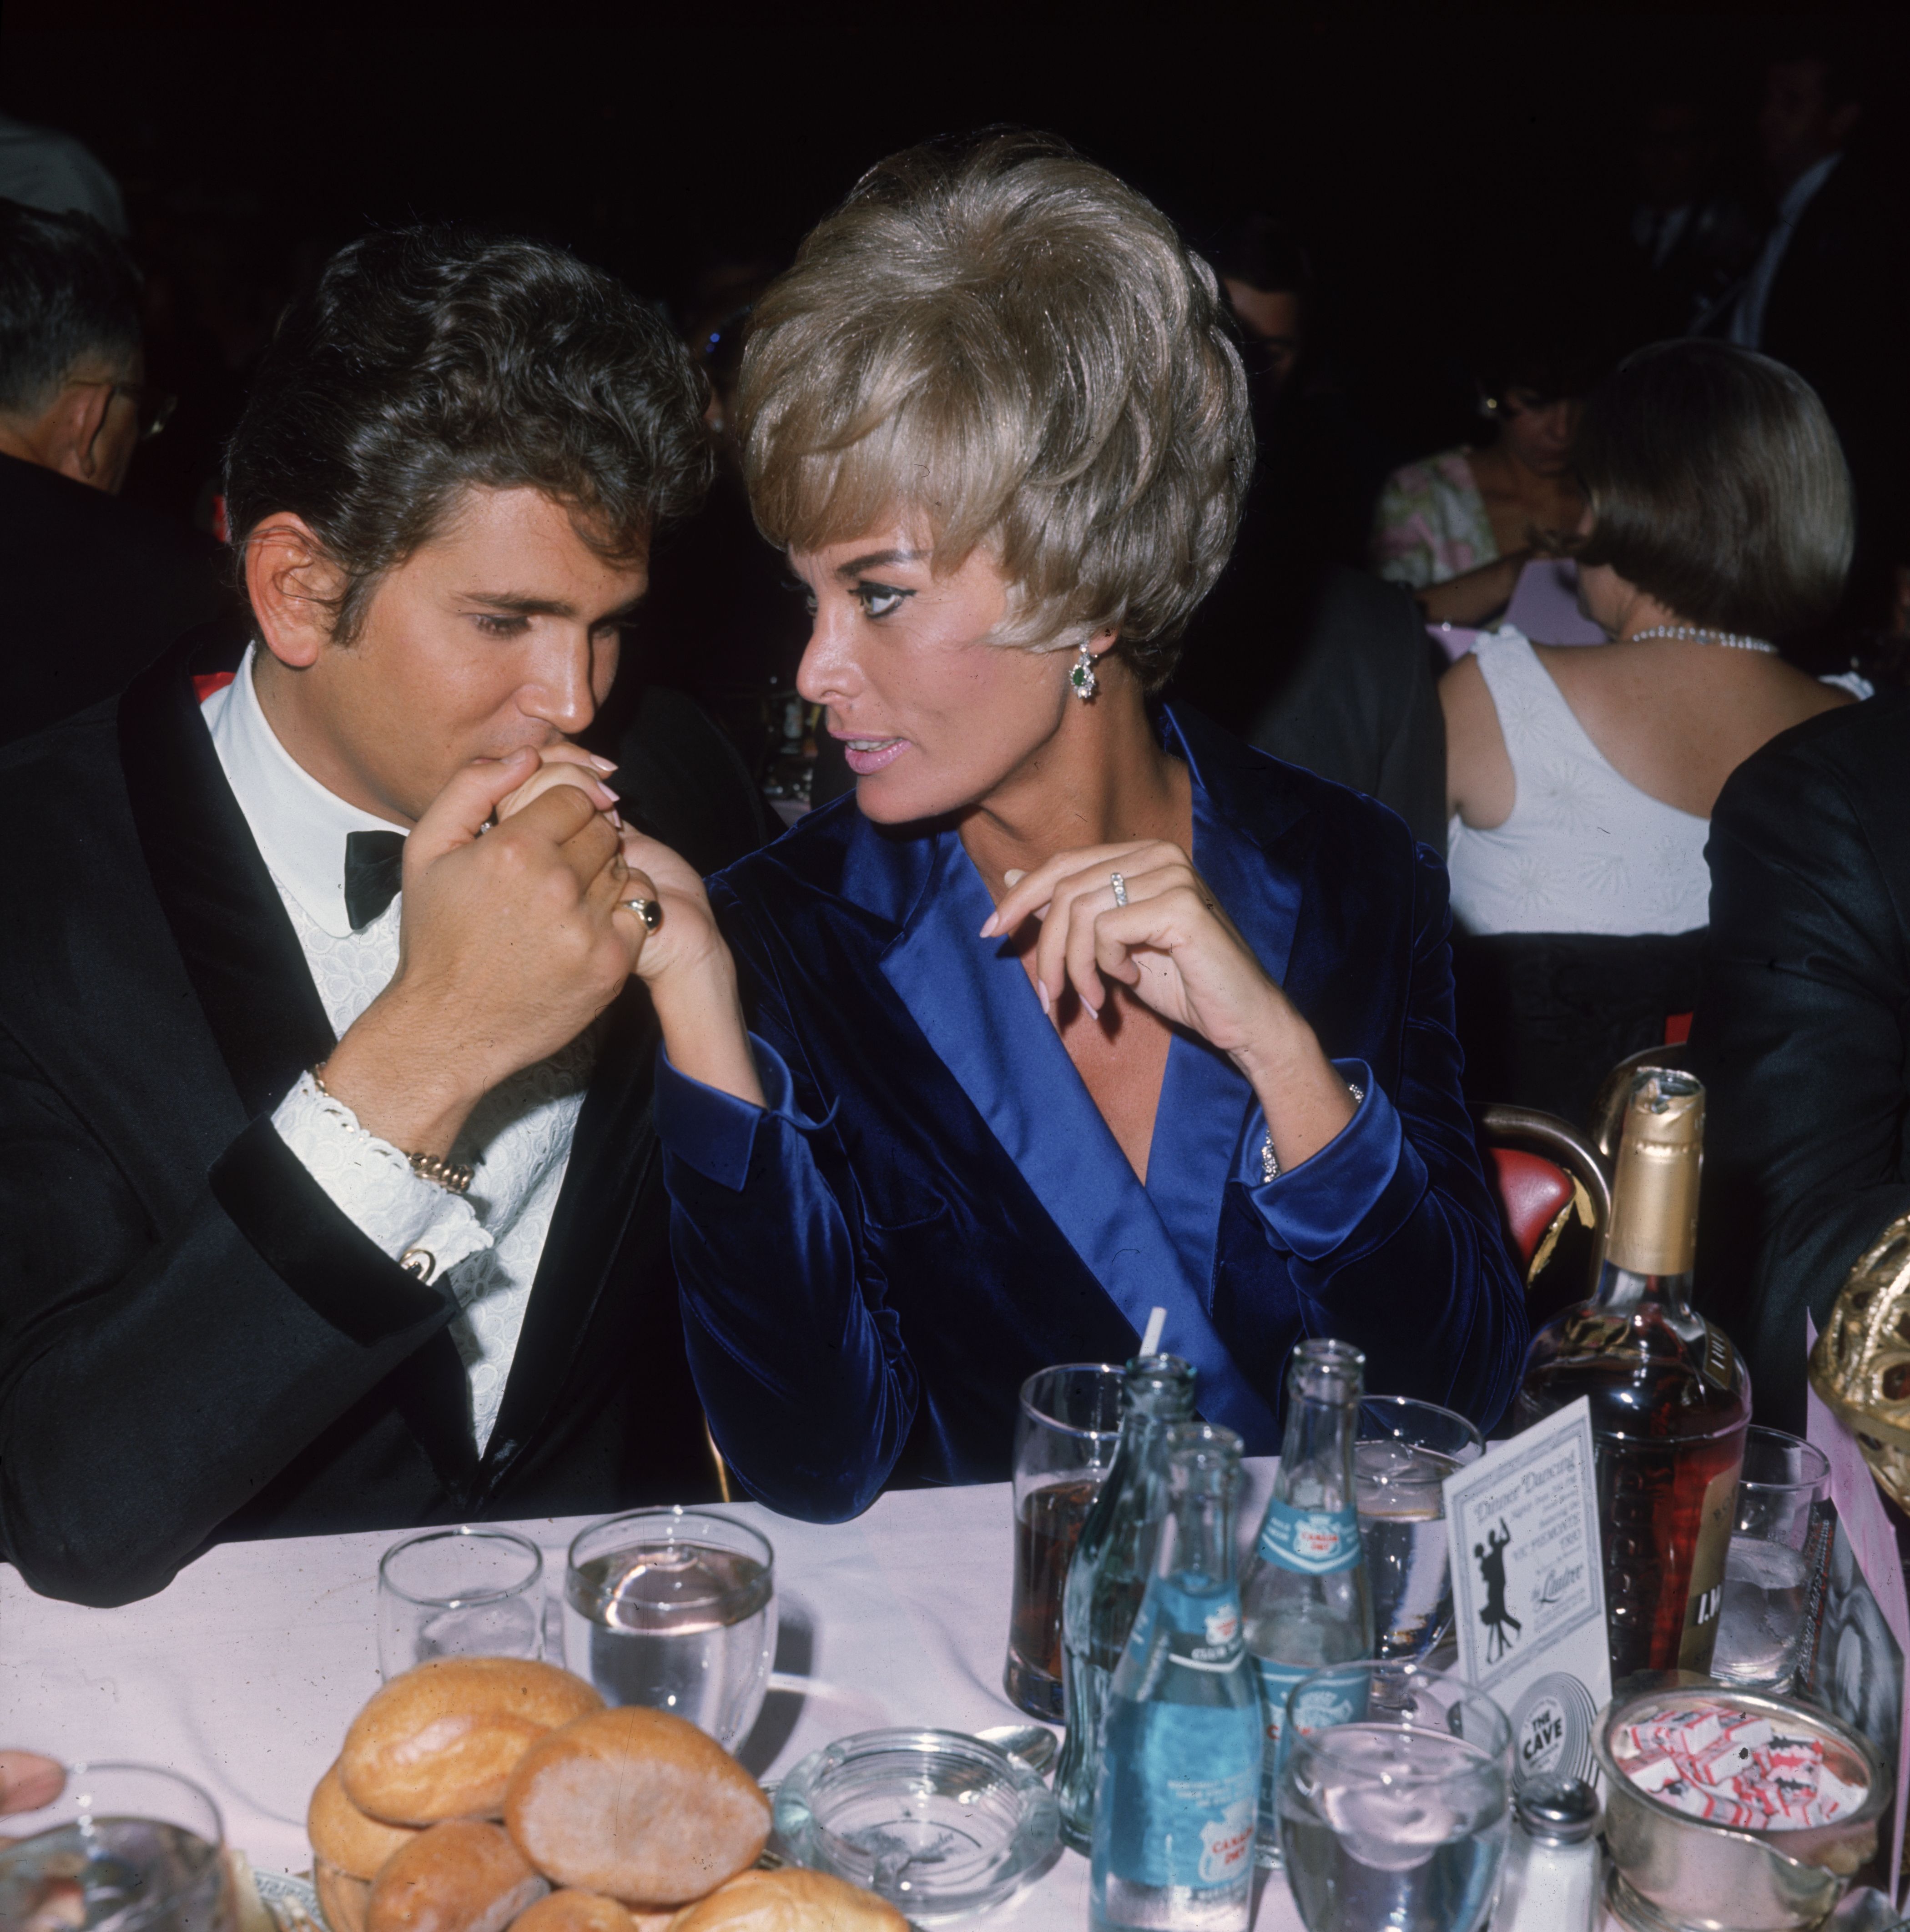 Michael Landon and his wife, Marjorie Lynn Noe, at the opening night of singer Susan Barrett's performances in Hollywood, California, in November 1966: | Source: Max B. Miller/Fotos International/Getty Images